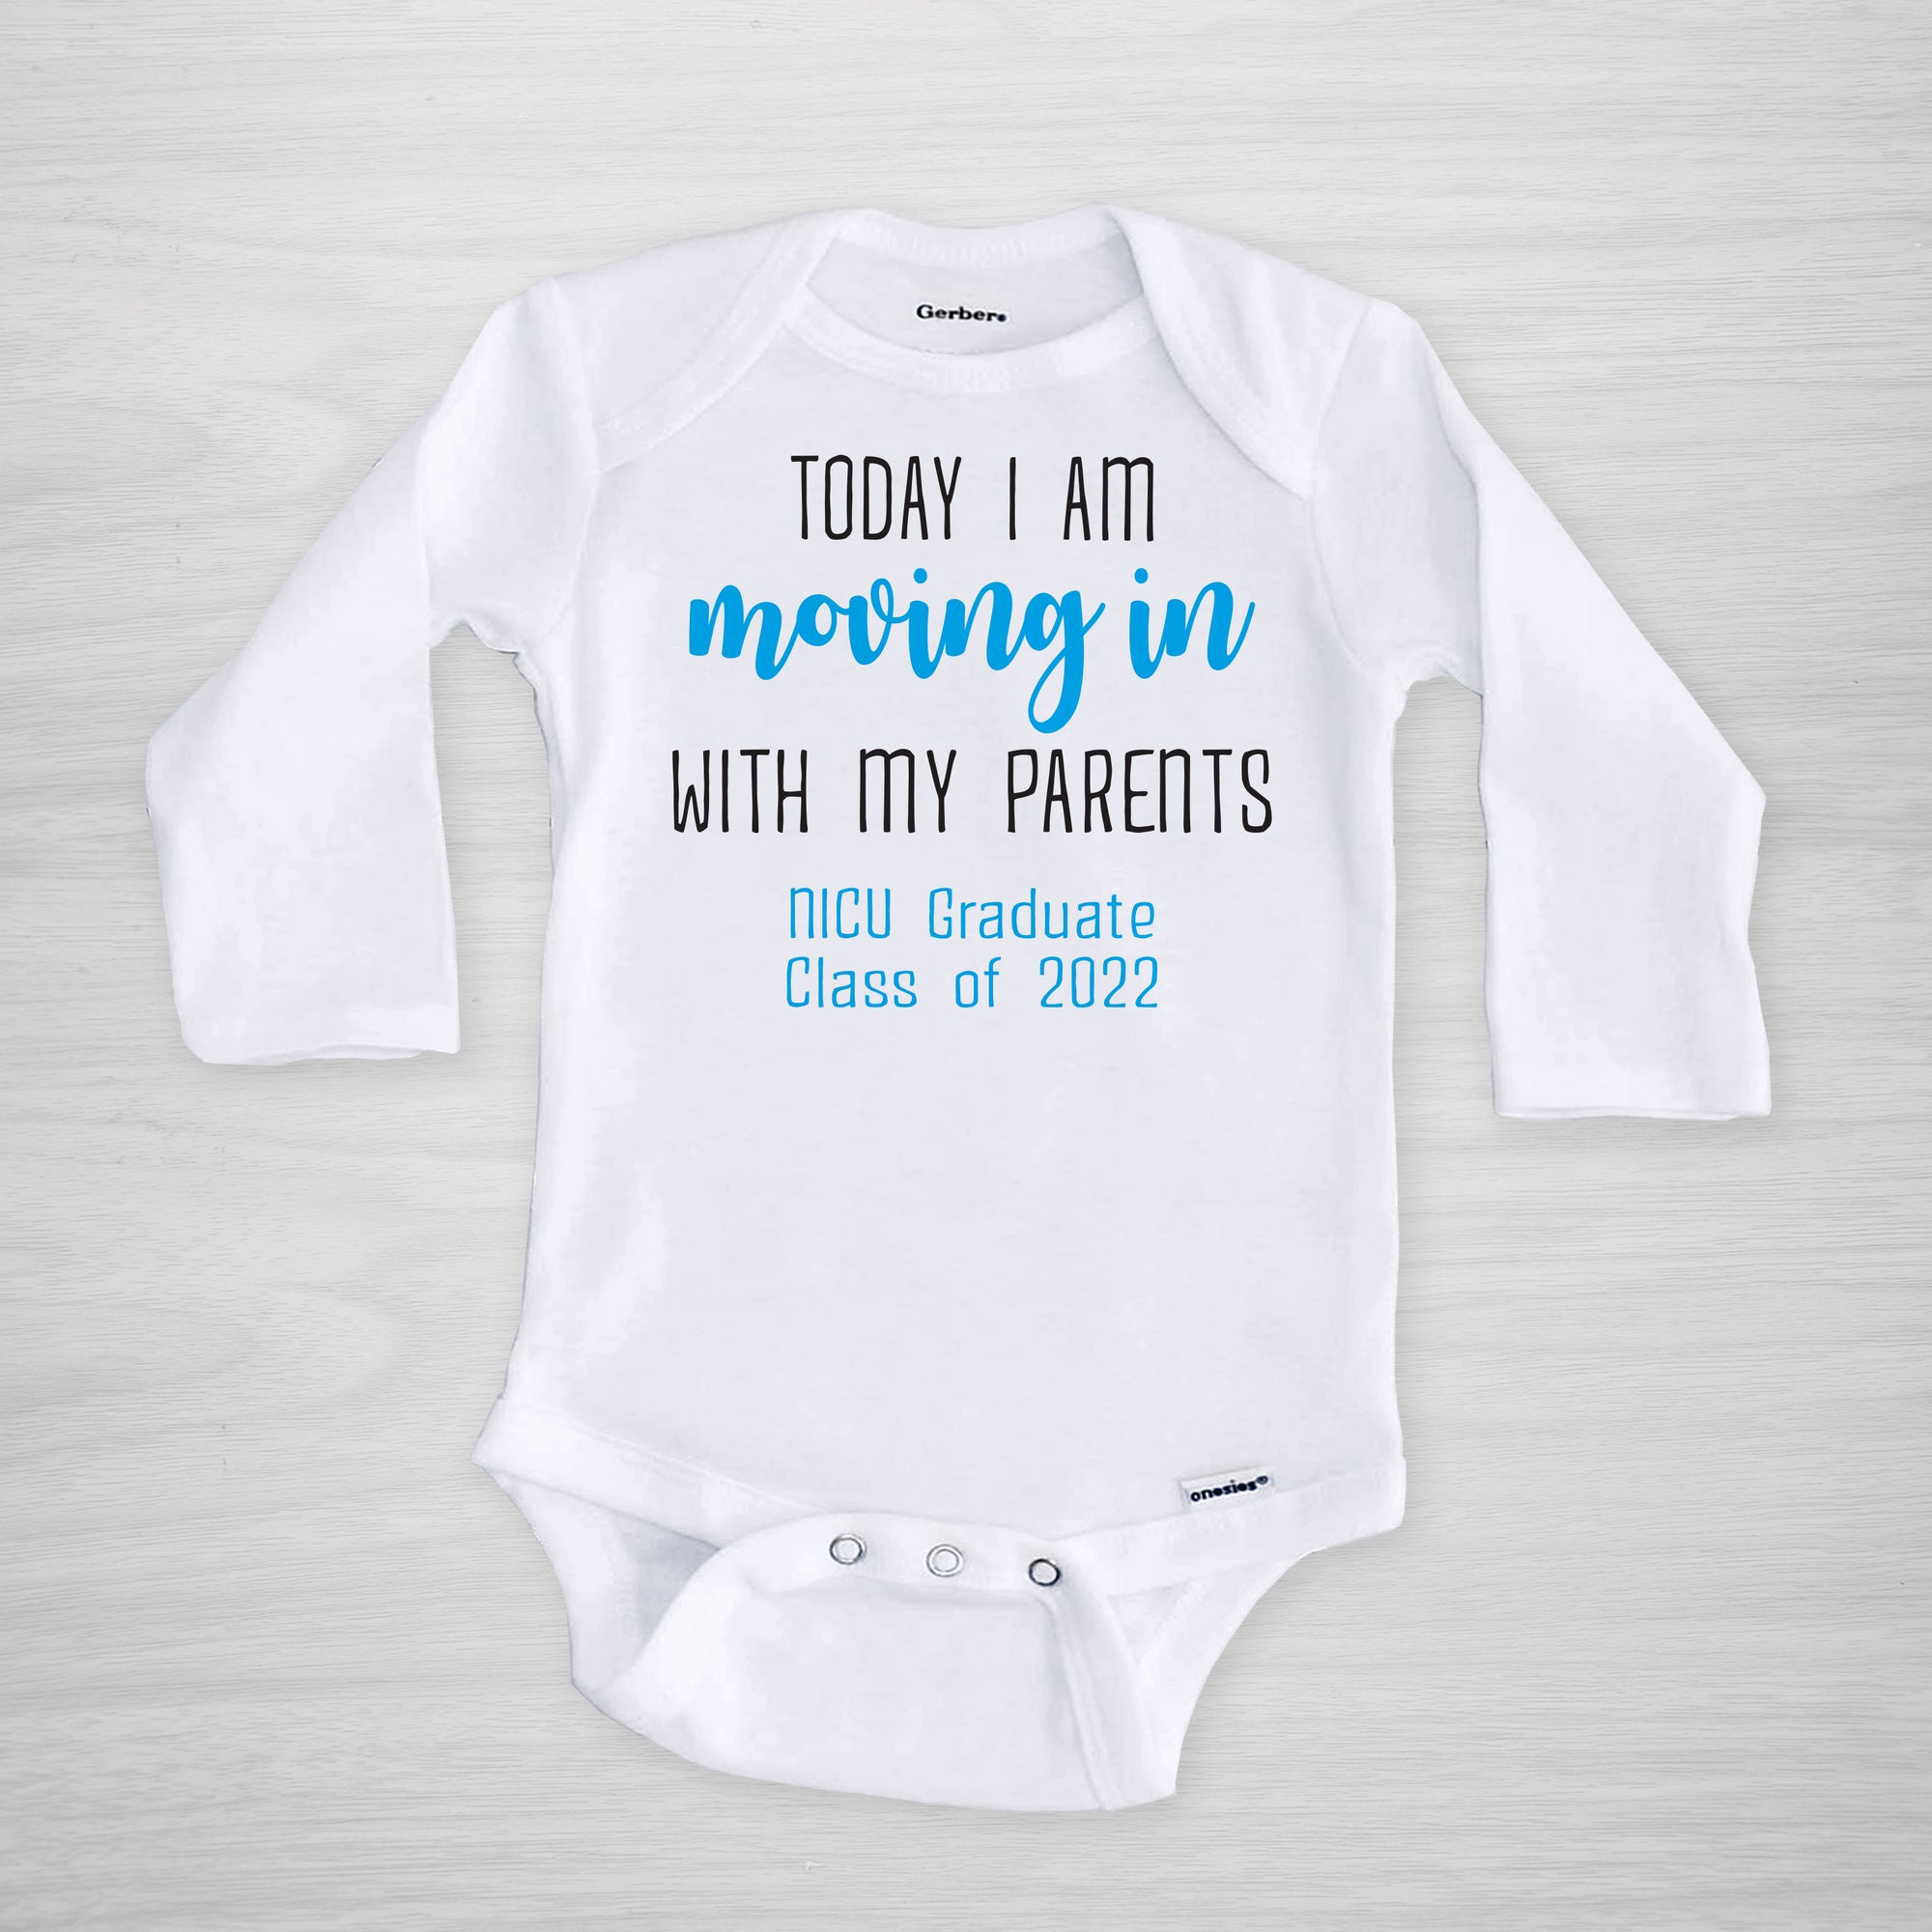 Today I am moving in with my parents, NICU Graduate Class of 2022, long sleeved blue, pipsy.com